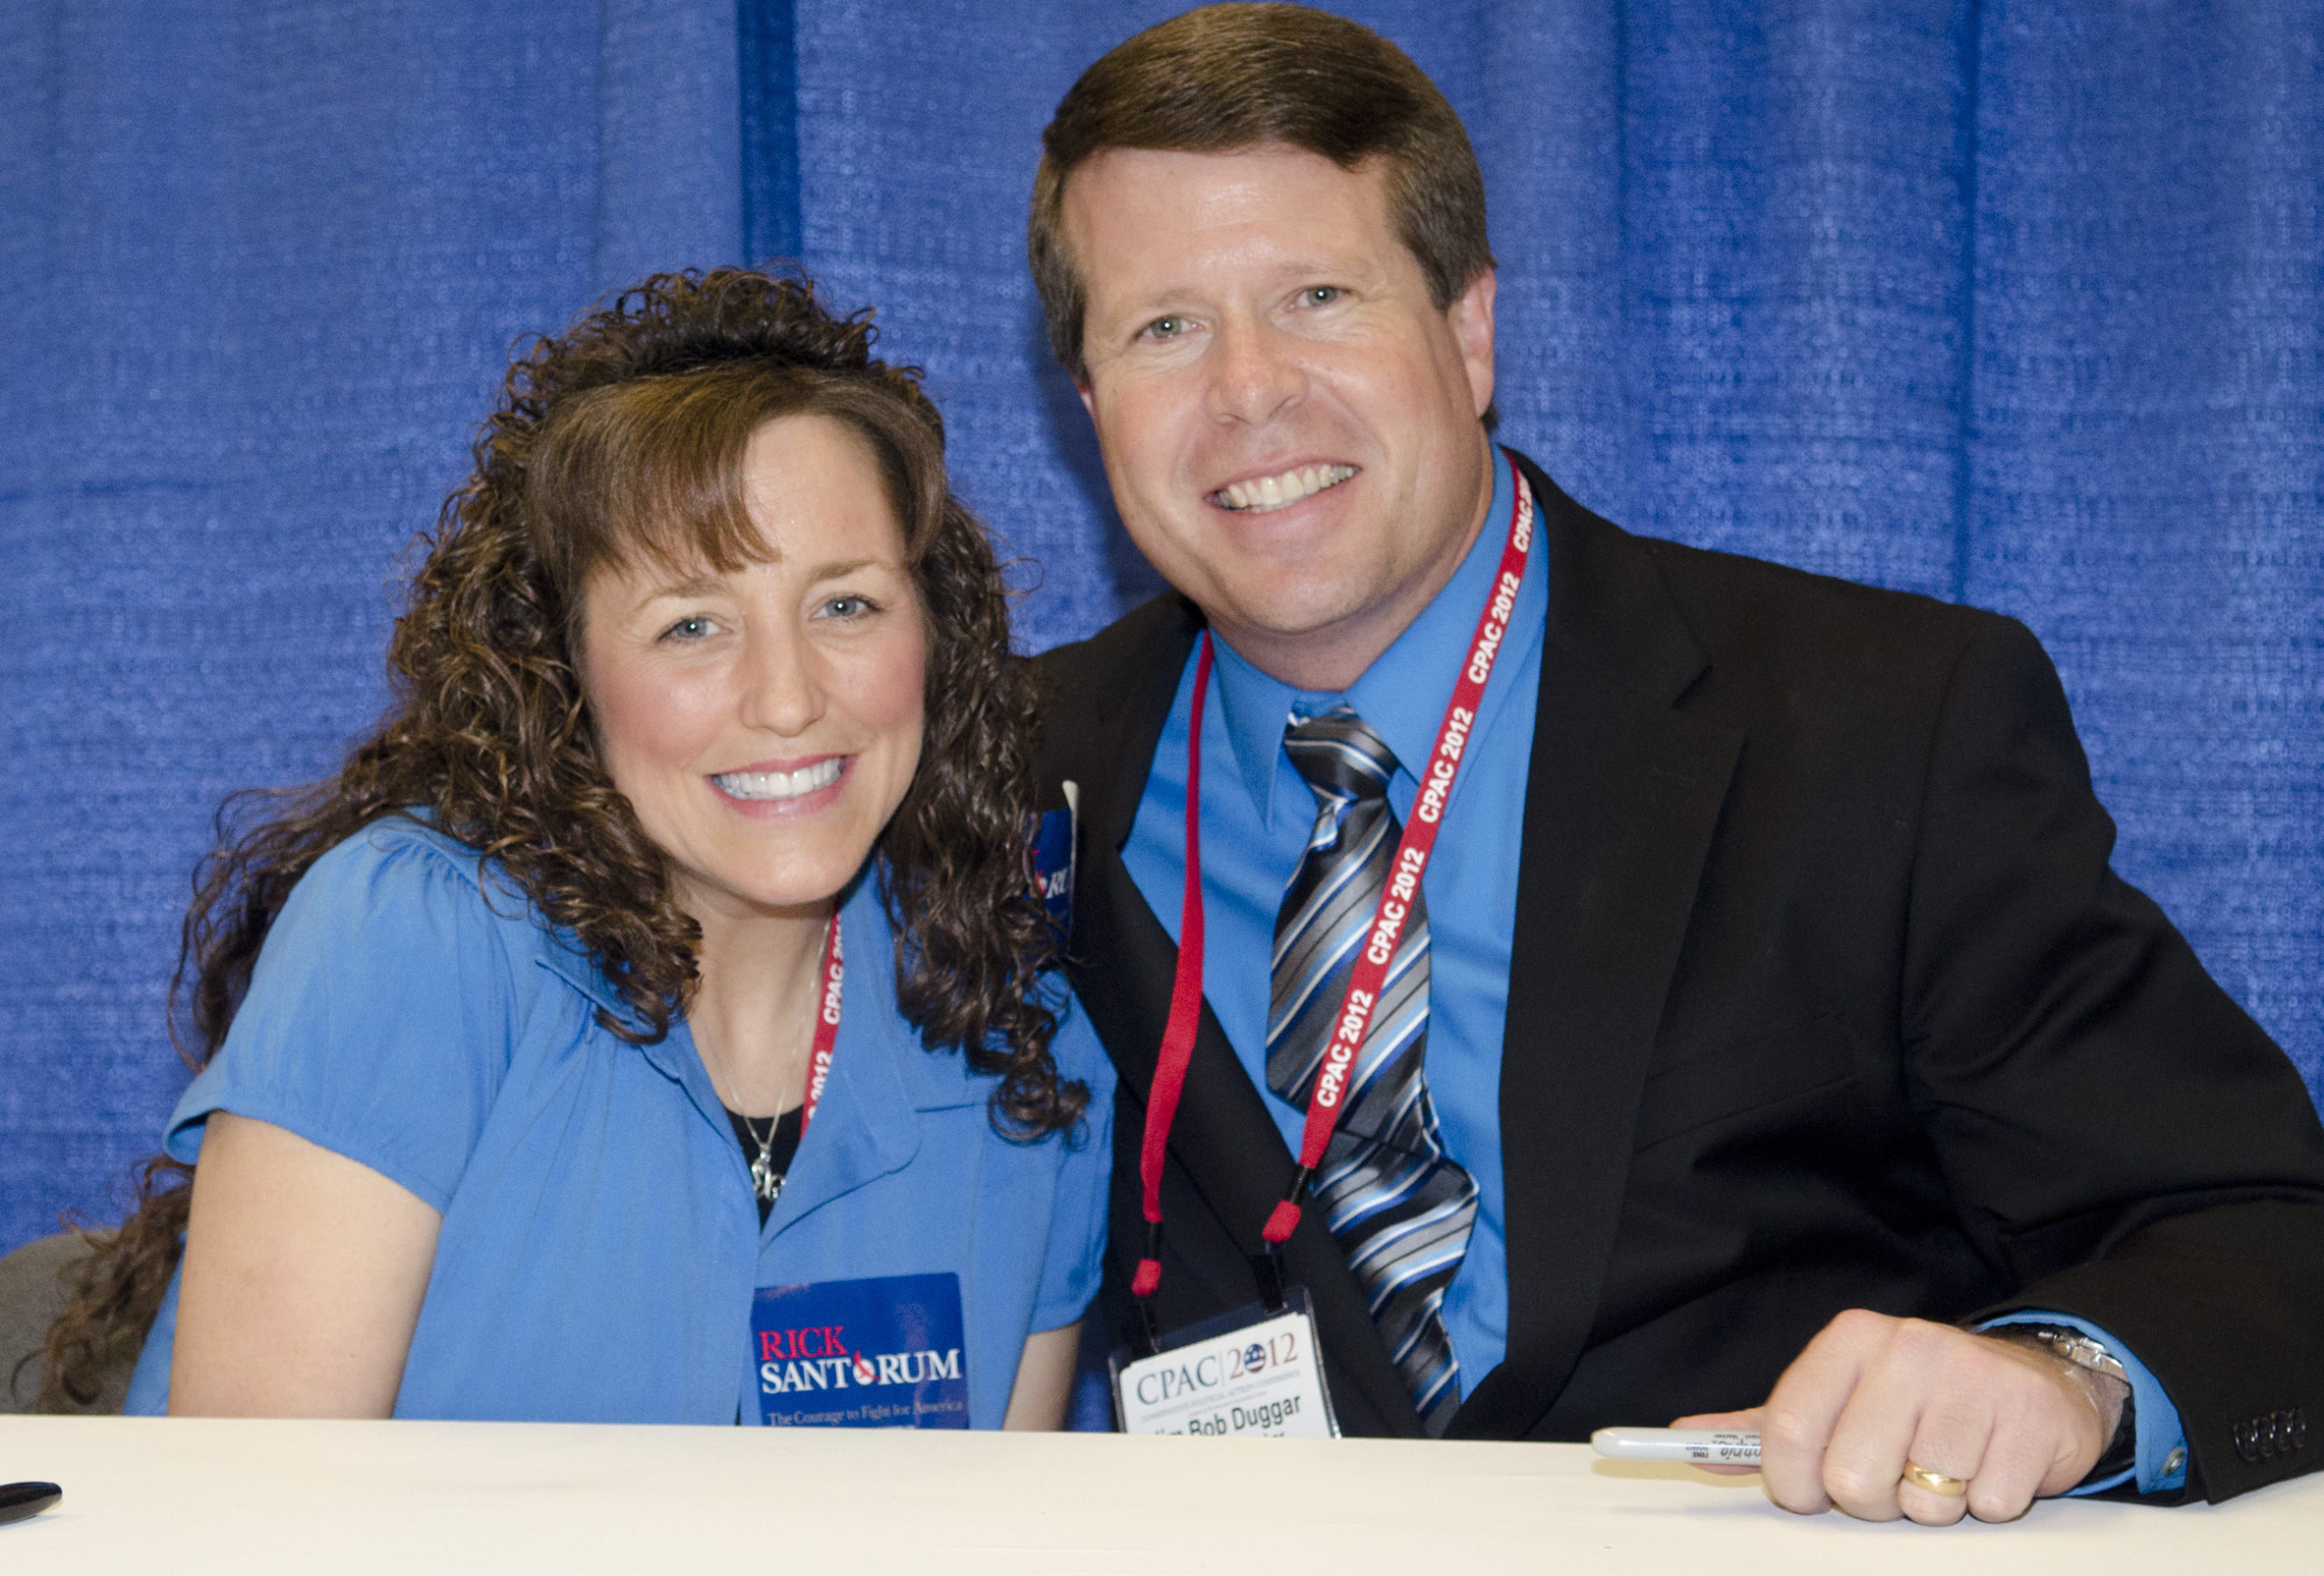 TLC 19 Kids and Counting Jim Bob And Michelle Duggar Shocking Marriage Details Resurface!